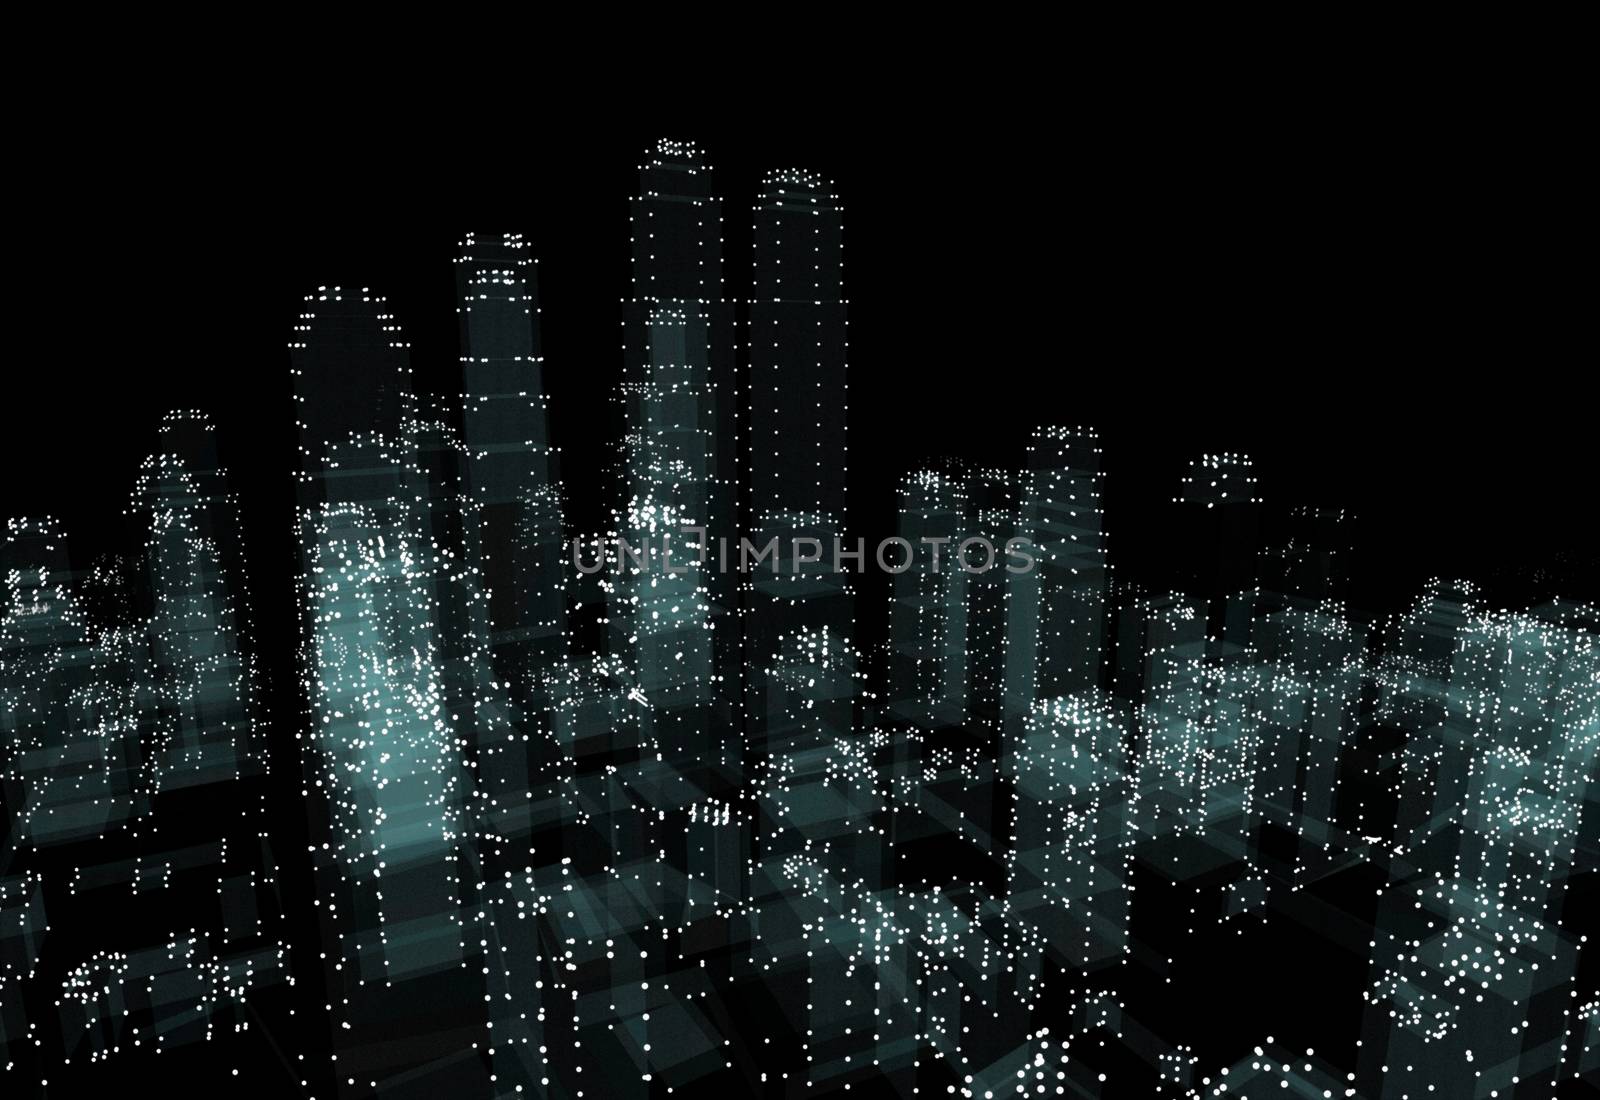 Abstract 3d city rendering with dots and digital elements. Technology concept. 3d illustration